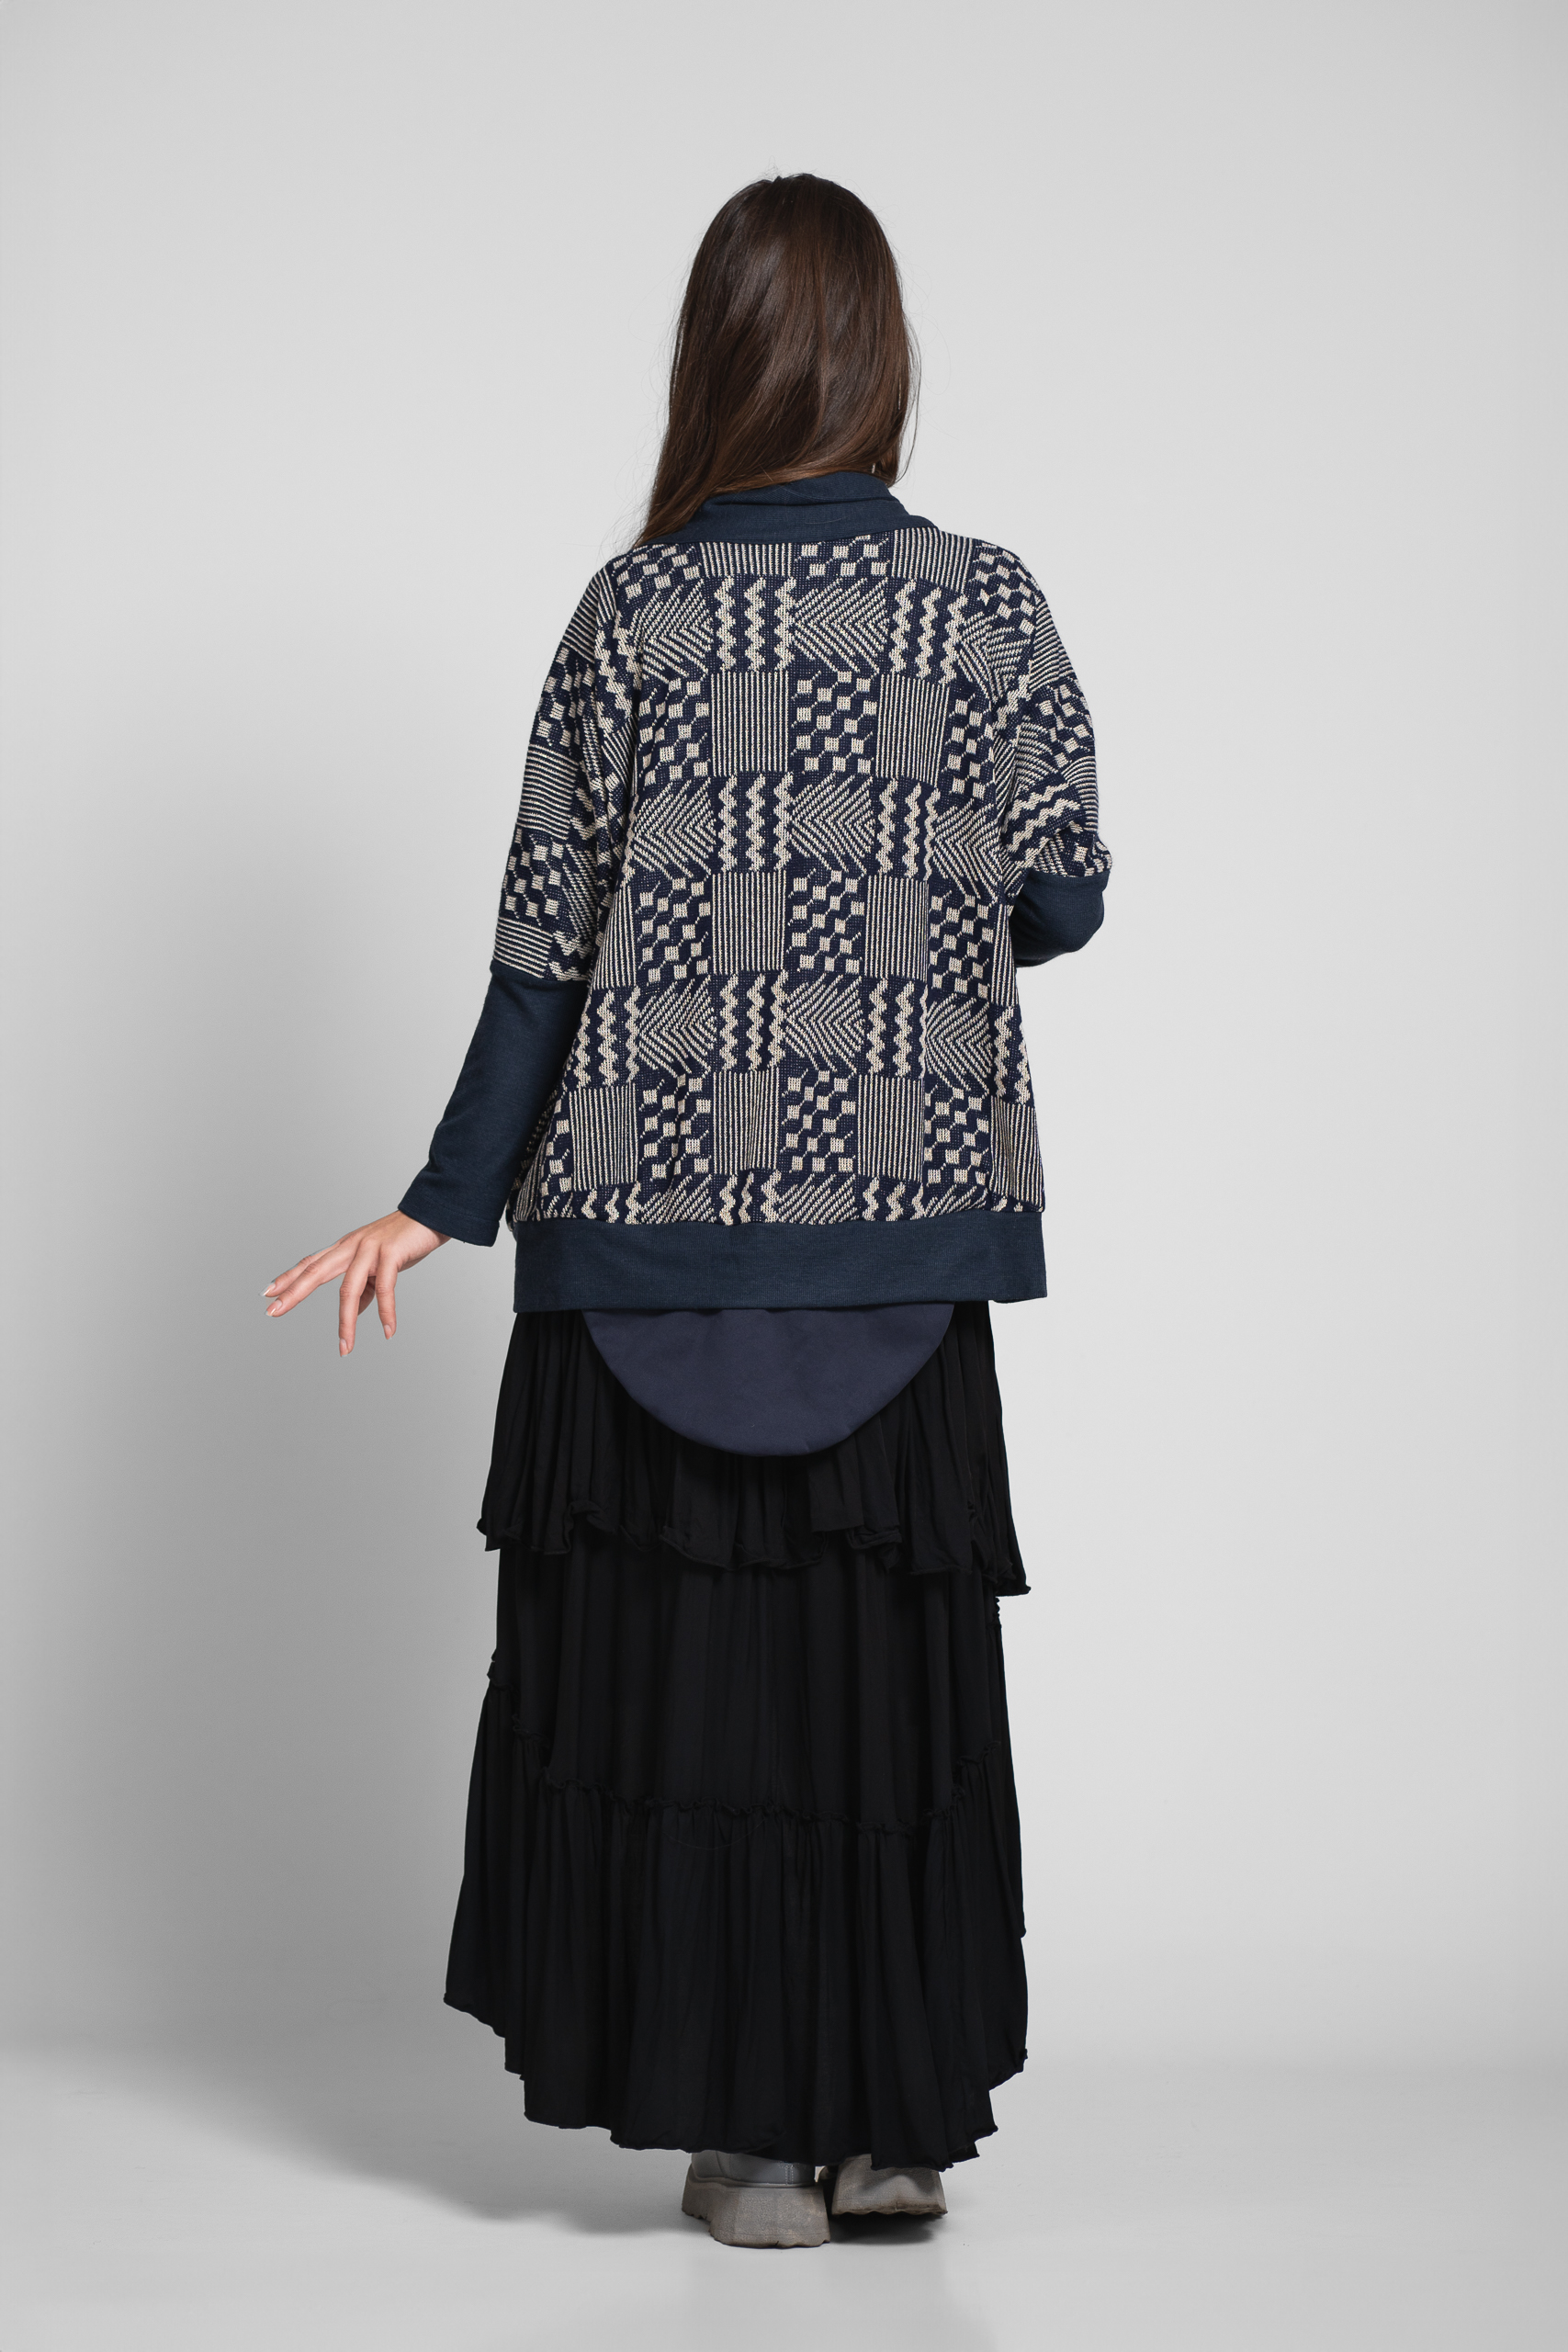 AMON CASUAL BLUE SWEATER WITH POCKETS. Natural fabrics, original design, handmade embroidery